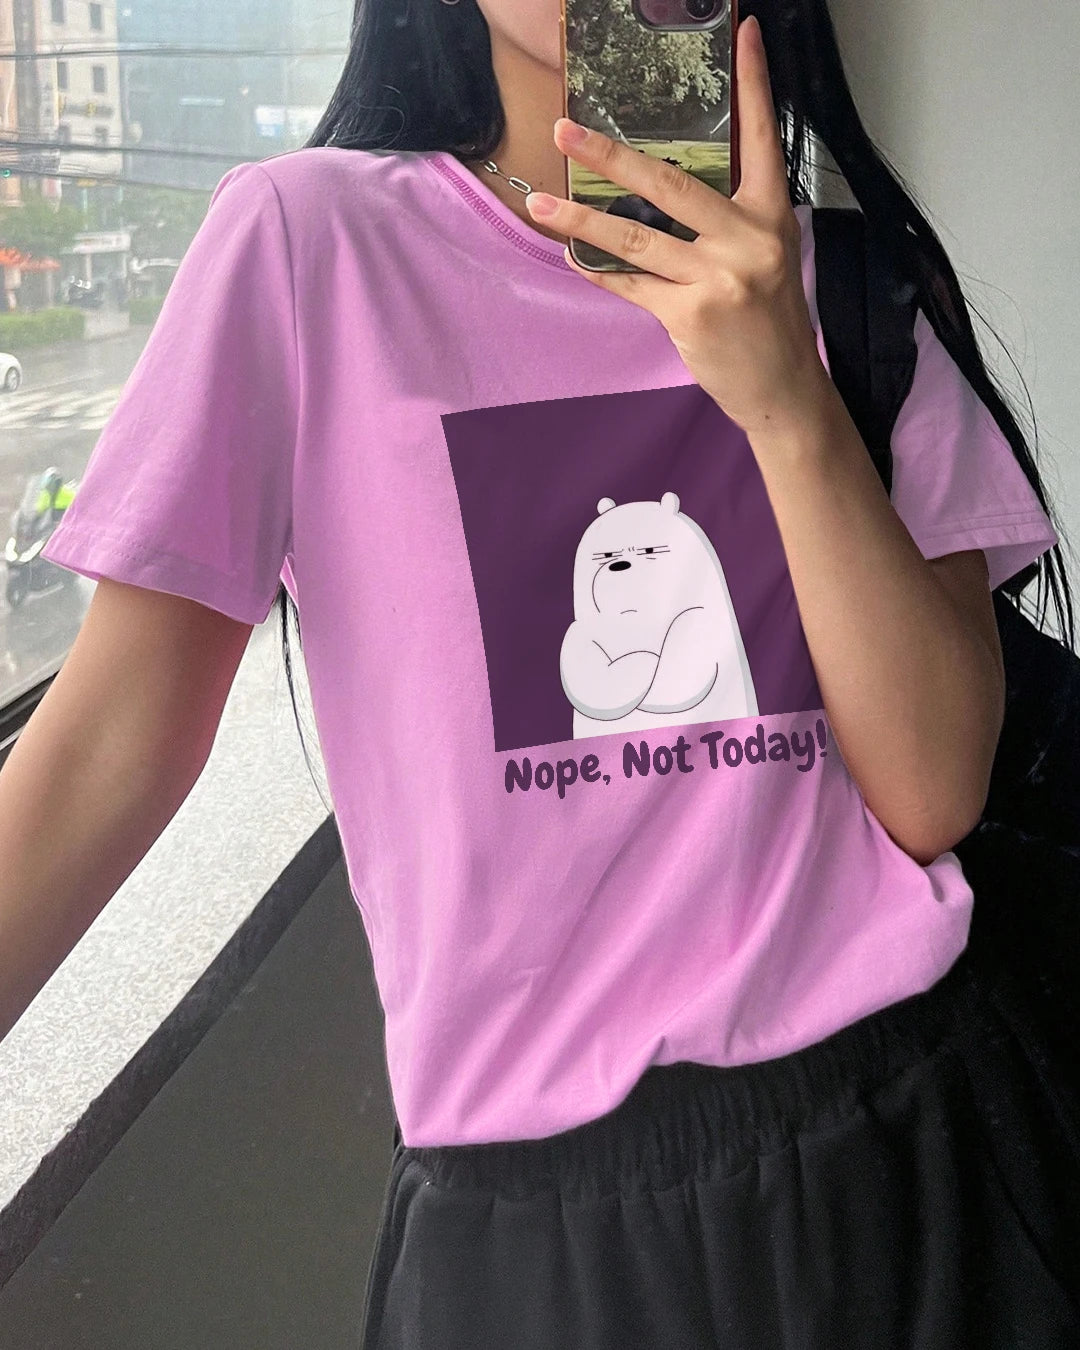 Nope, Not Today! T-Shirt